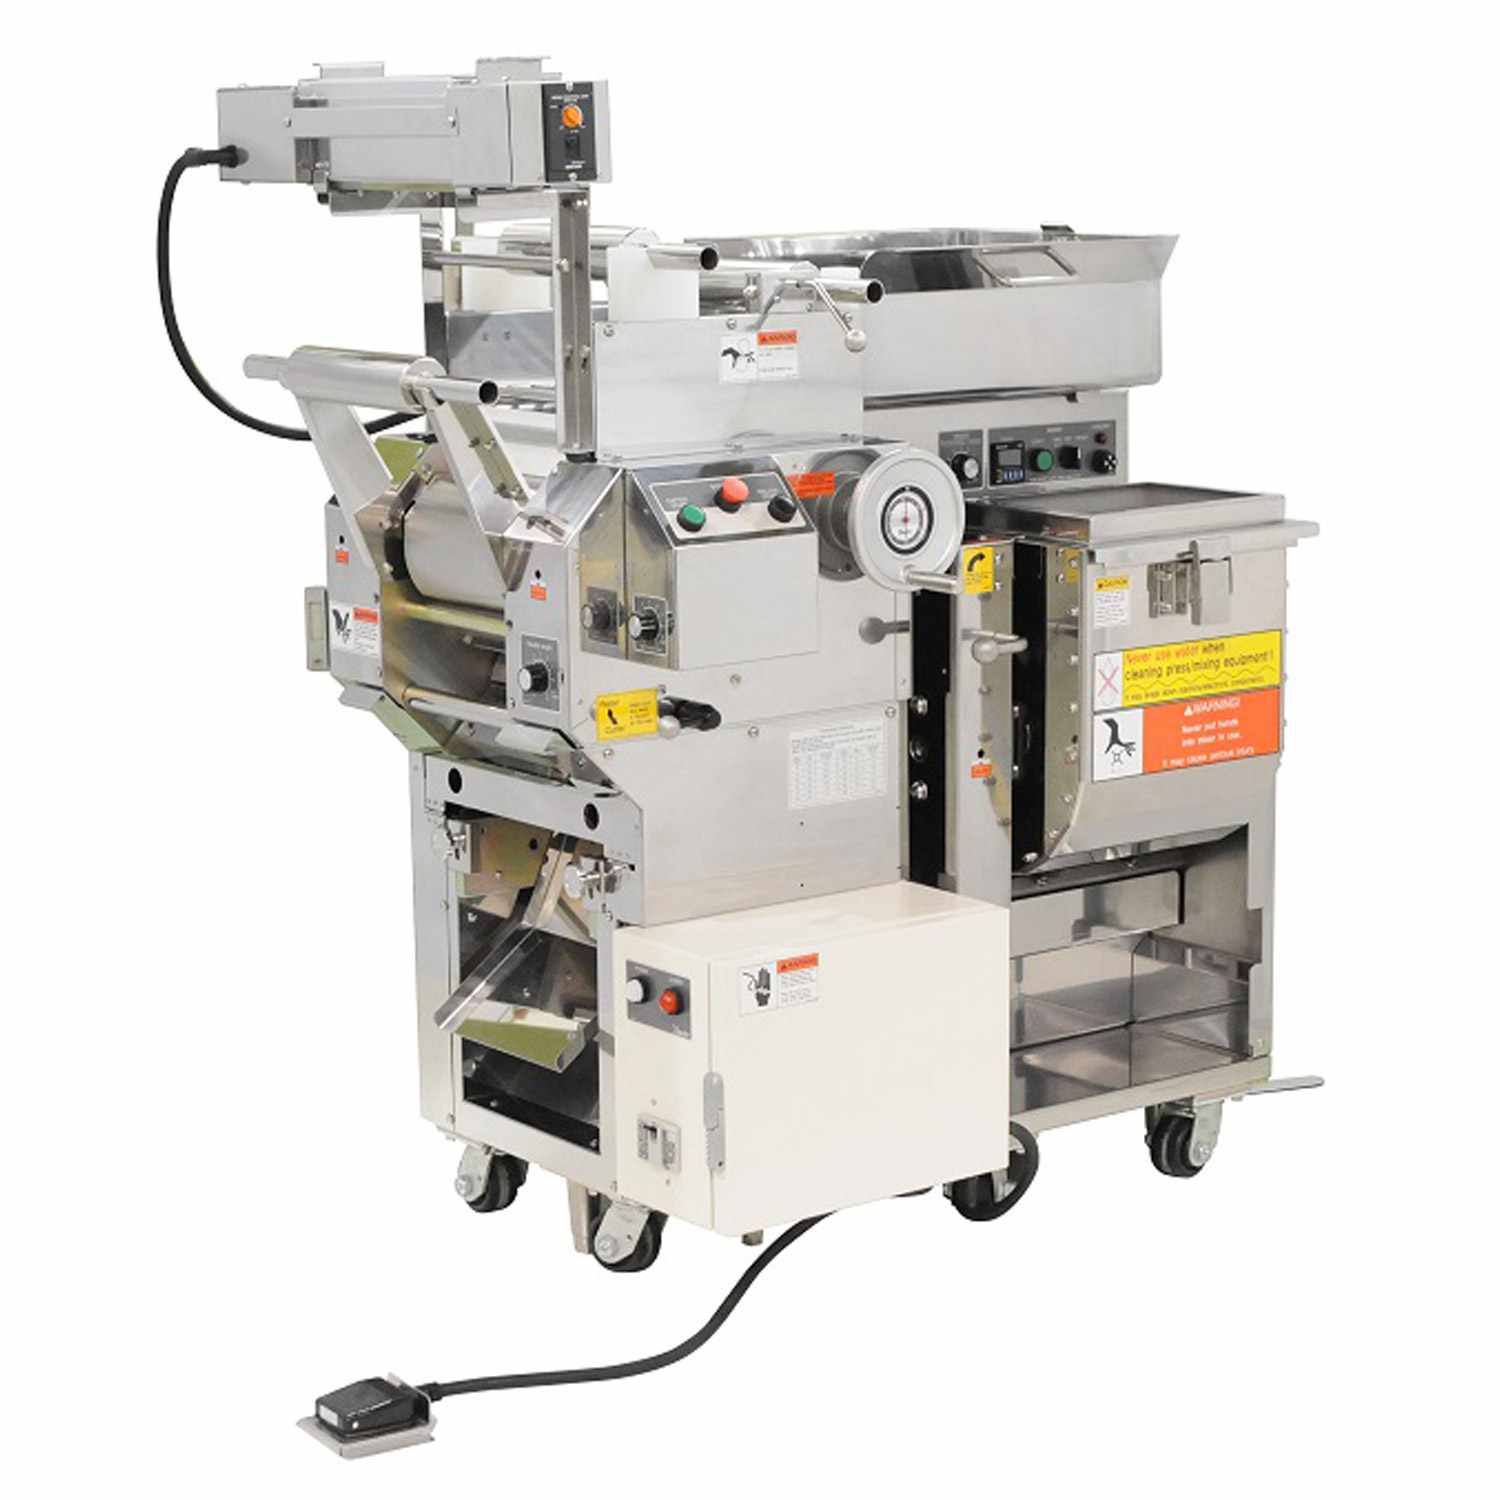 A guide on choosing the right noodle machine - Yamato Noodle